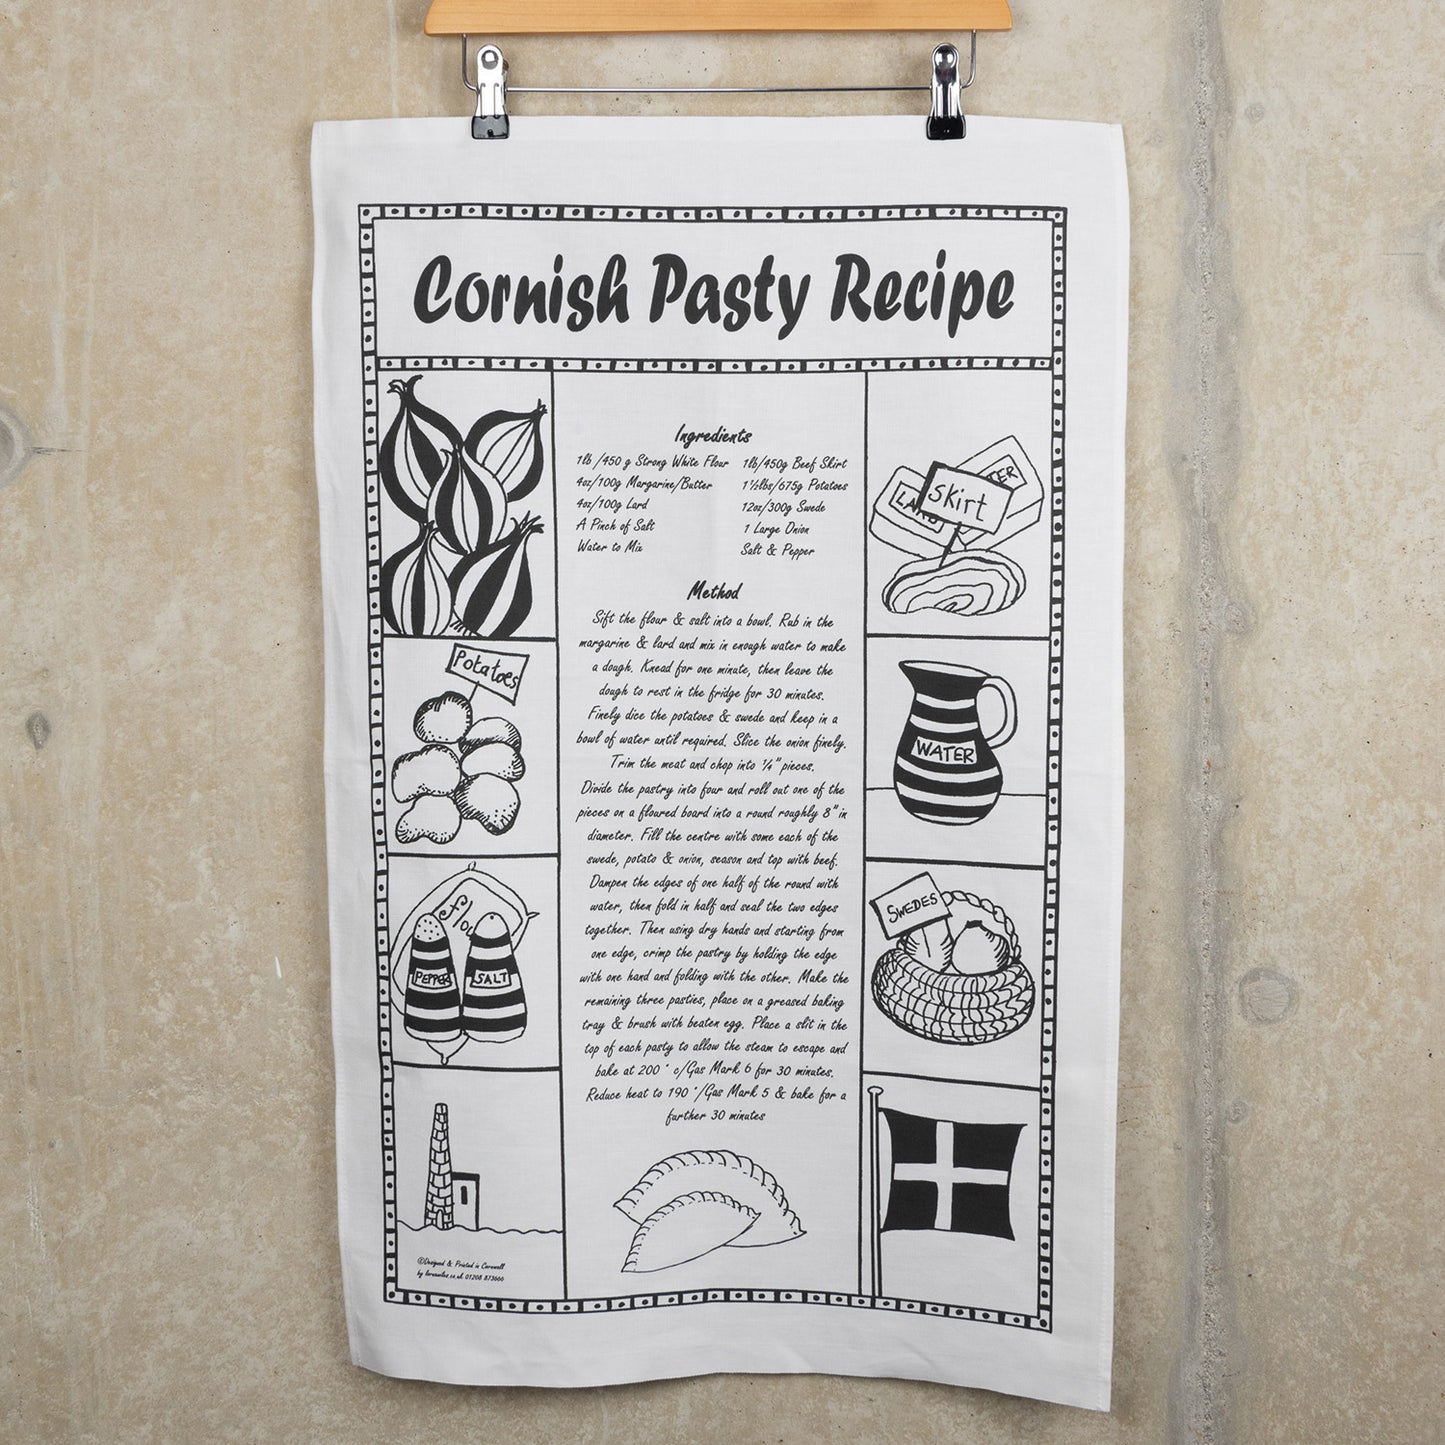 Black and white Cornish pasty recipe tea towel hanging from a hanger against a grey background.